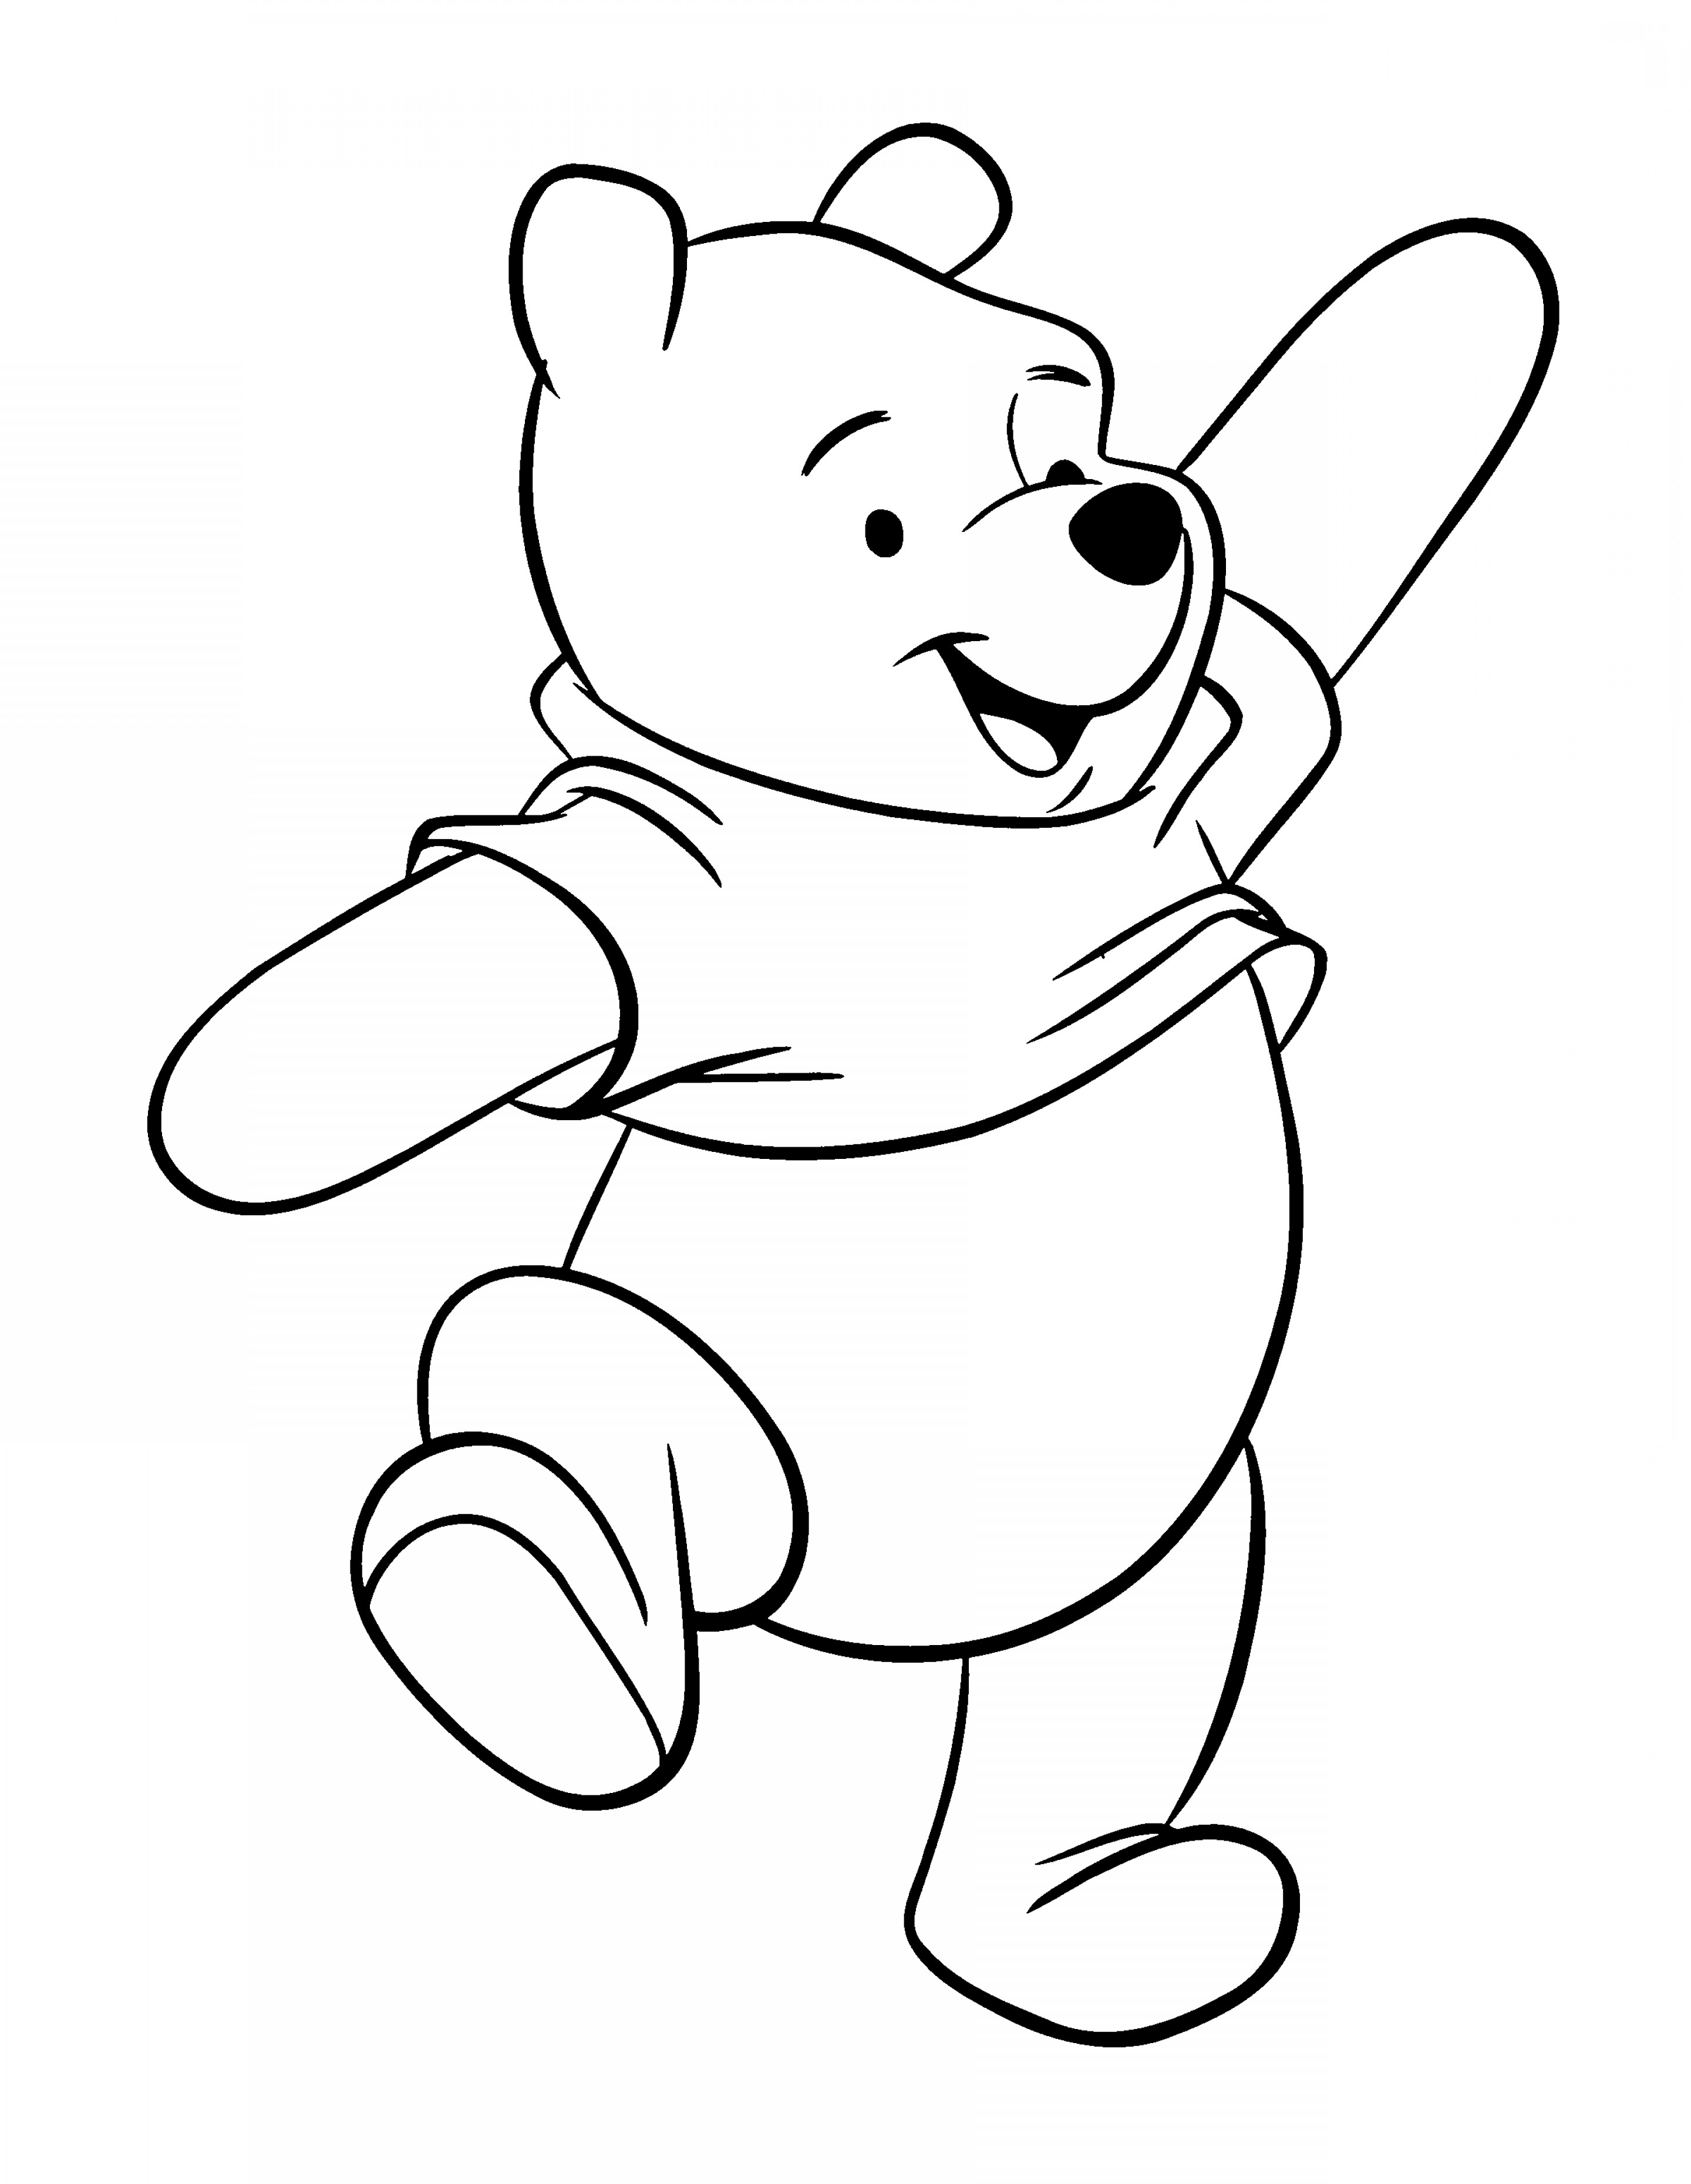 Snoopy And Woodstock Coloring Pages Successful Television Coloring Page Instructive Peanuts Pages Snoopy